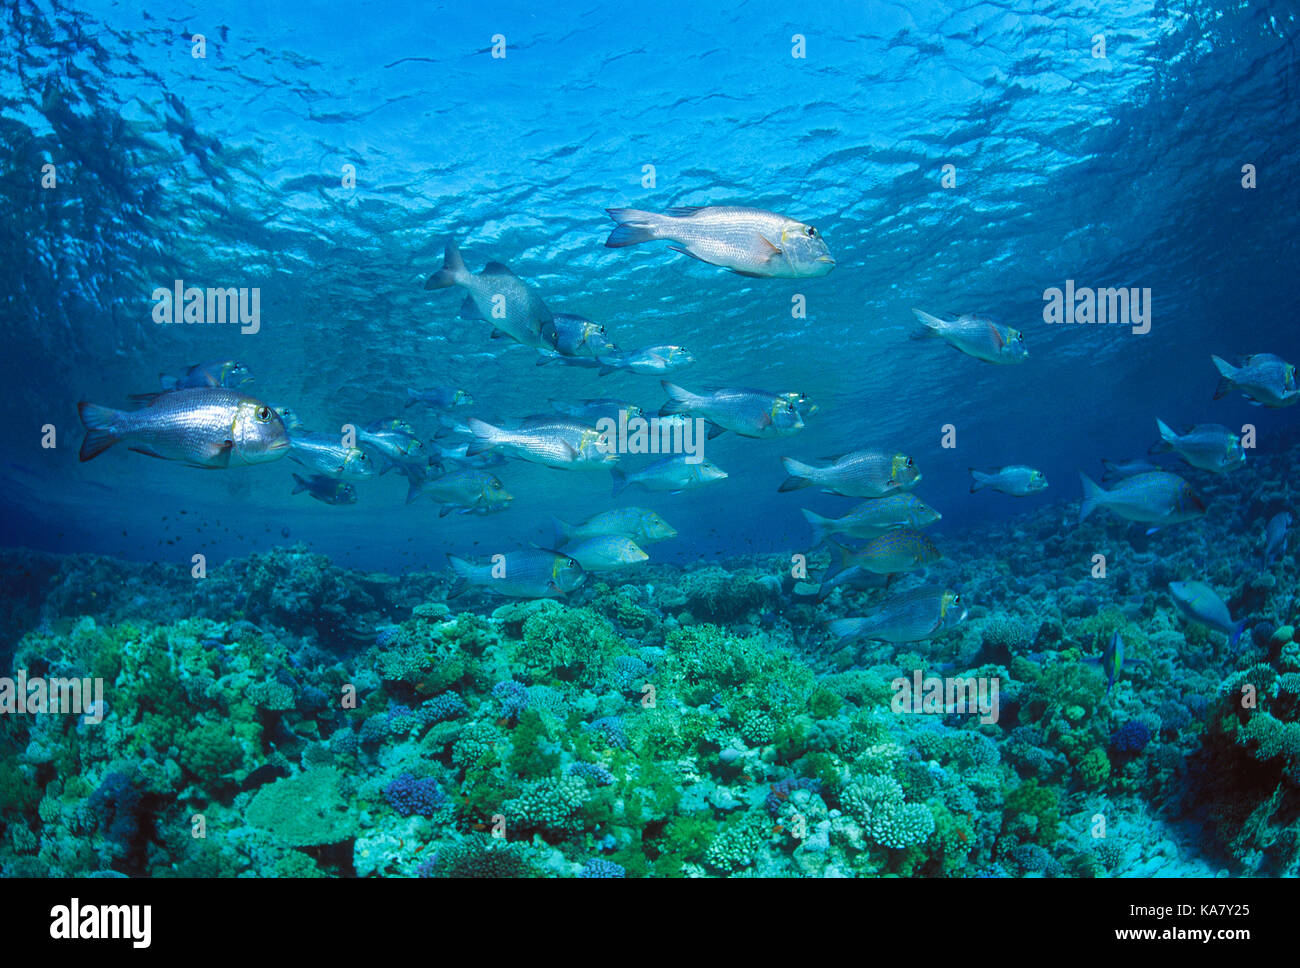 Egypt. Red Sea. Wildlife. Shoal of Sheepshead fishes over coral reef. Stock Photo